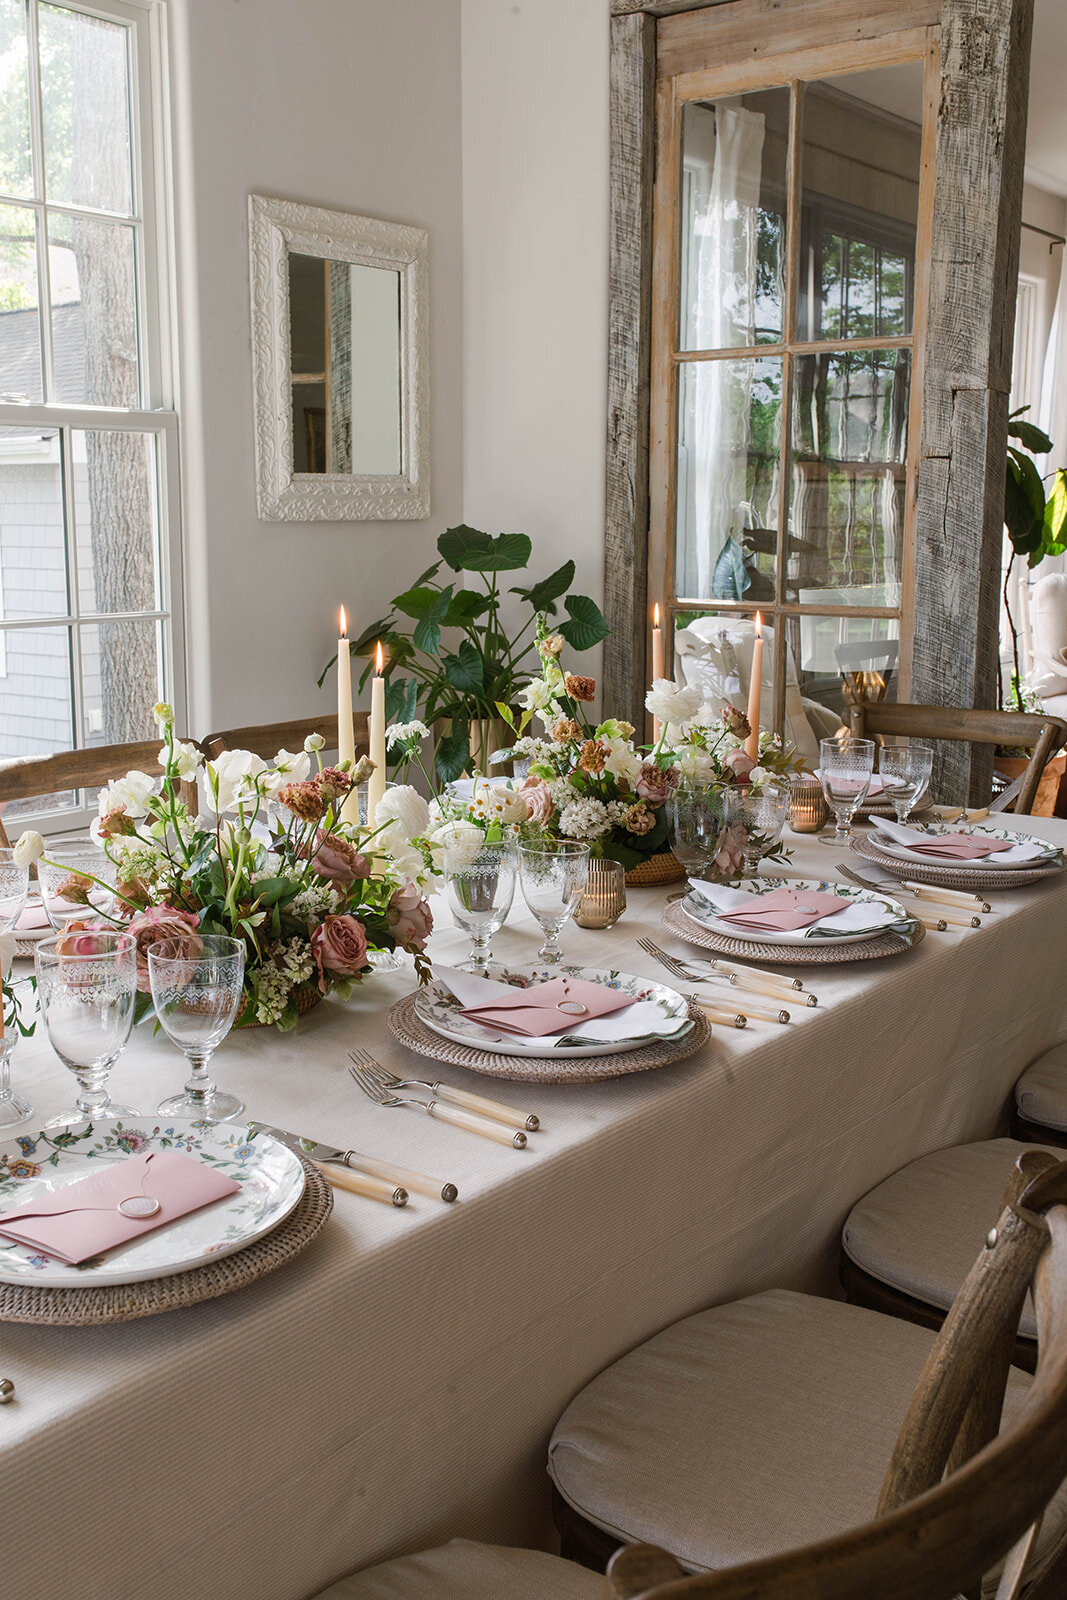 A long table with floral arrangements including white ranunculus, white snapdragons, brown lisianthus, mauve garden roses, and greenery with cream and sand-stone colored taper candles.